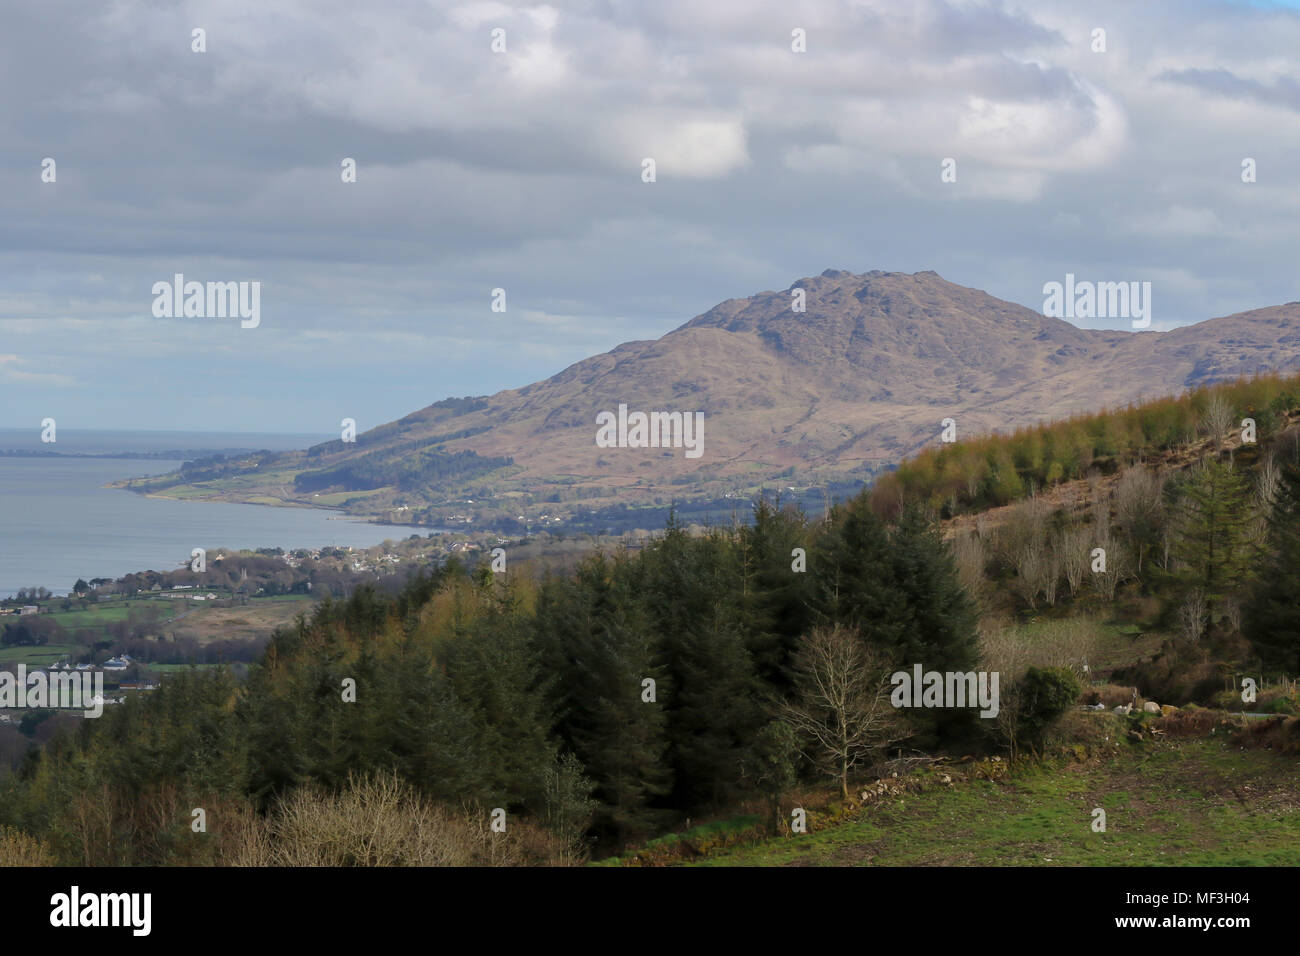 Slieve Foy is the highest point of the Cooley Peninsula in County Louth, Ireland. Stock Photo